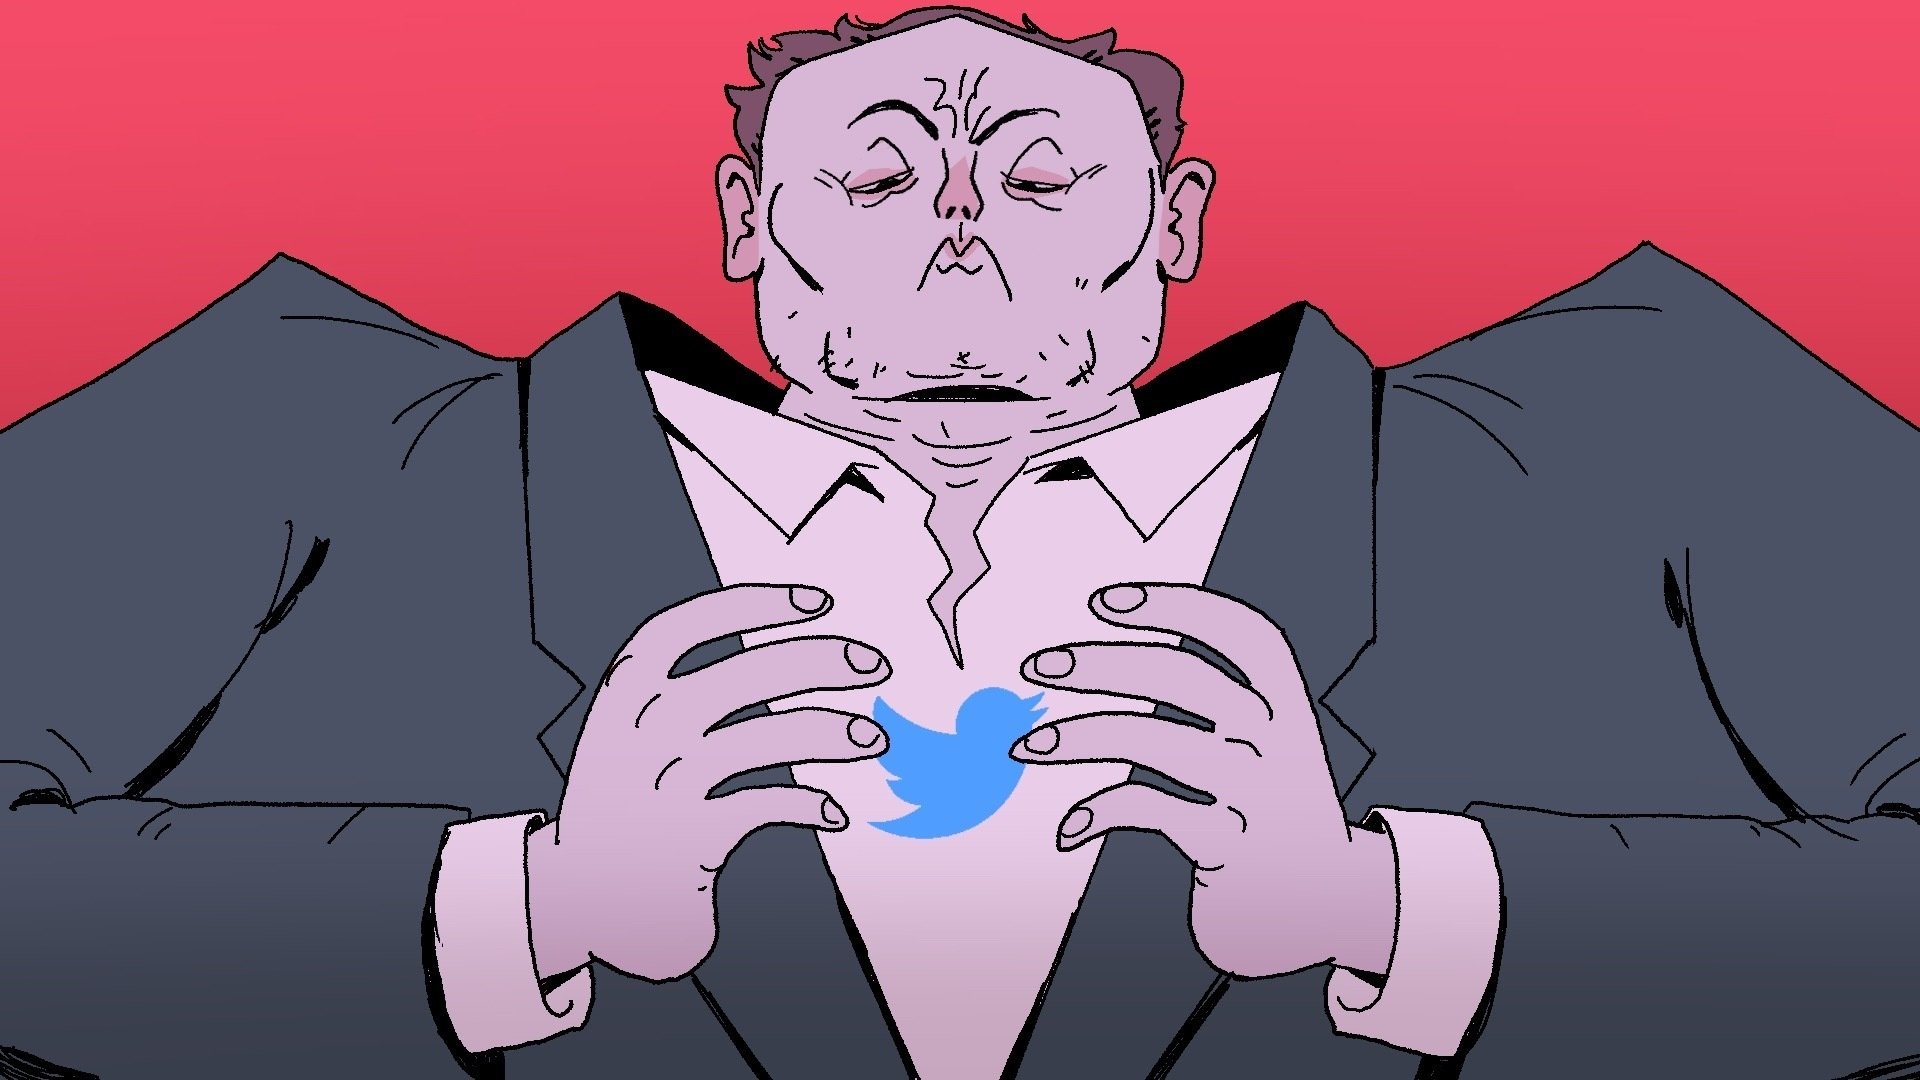 Elon Musk holding the blue bird of the Twitter logo in his hands.